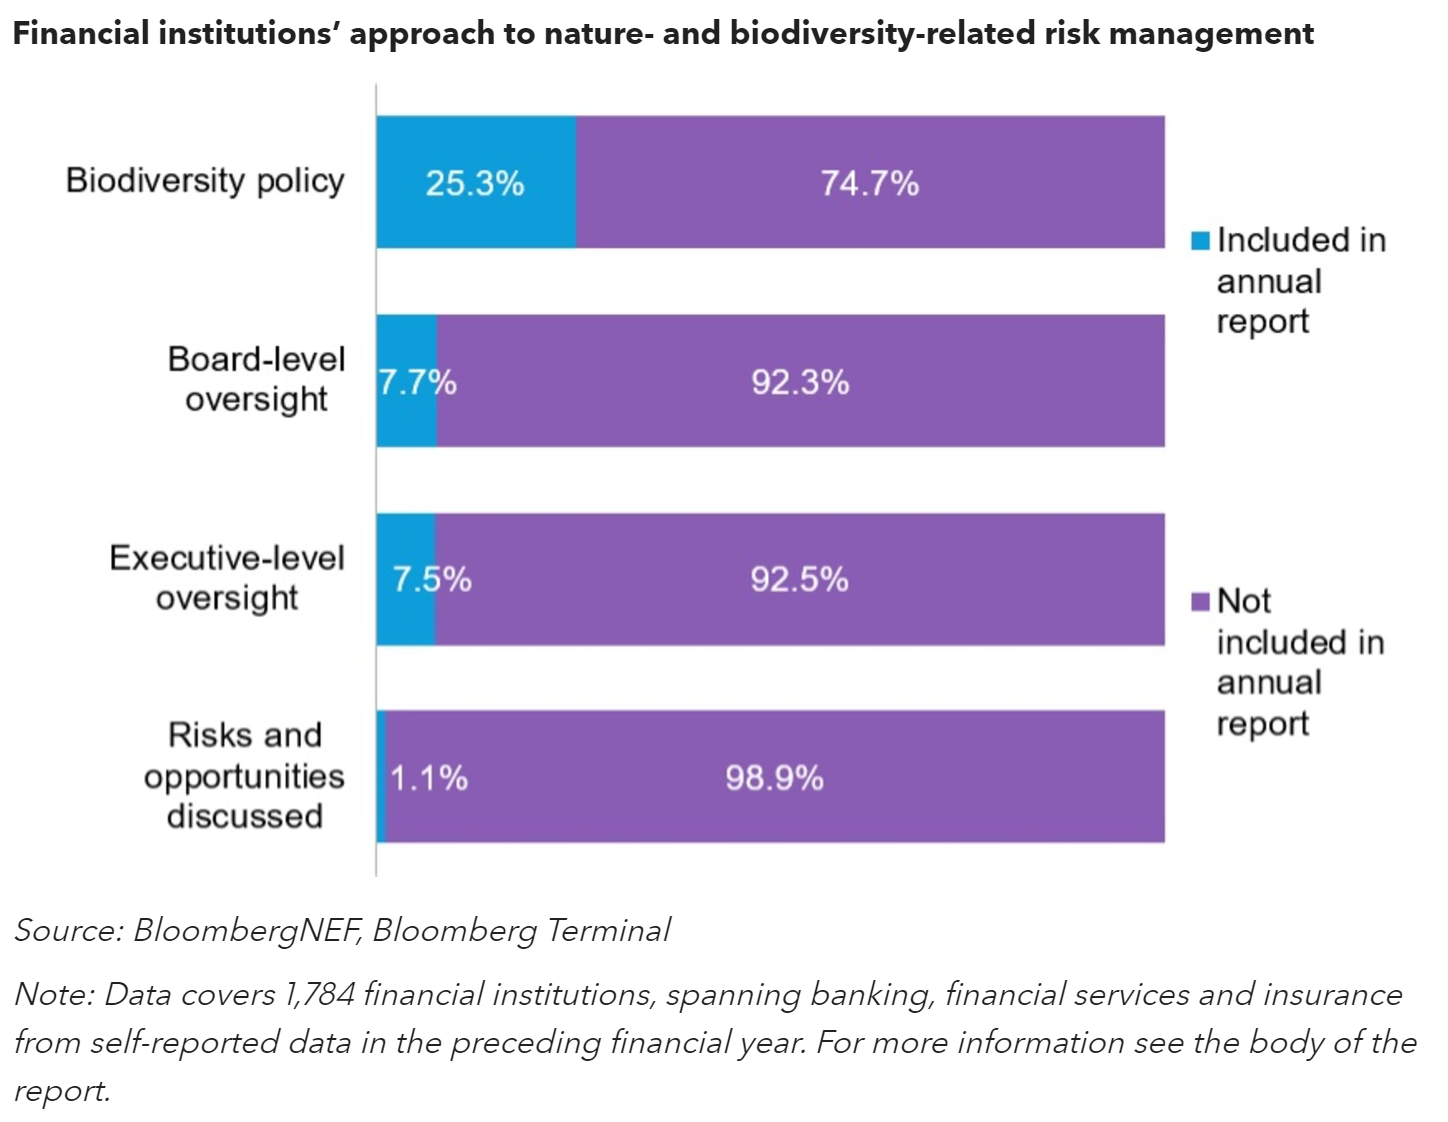 Financial institutions’ approach to nature- and biodiversity-related risk management